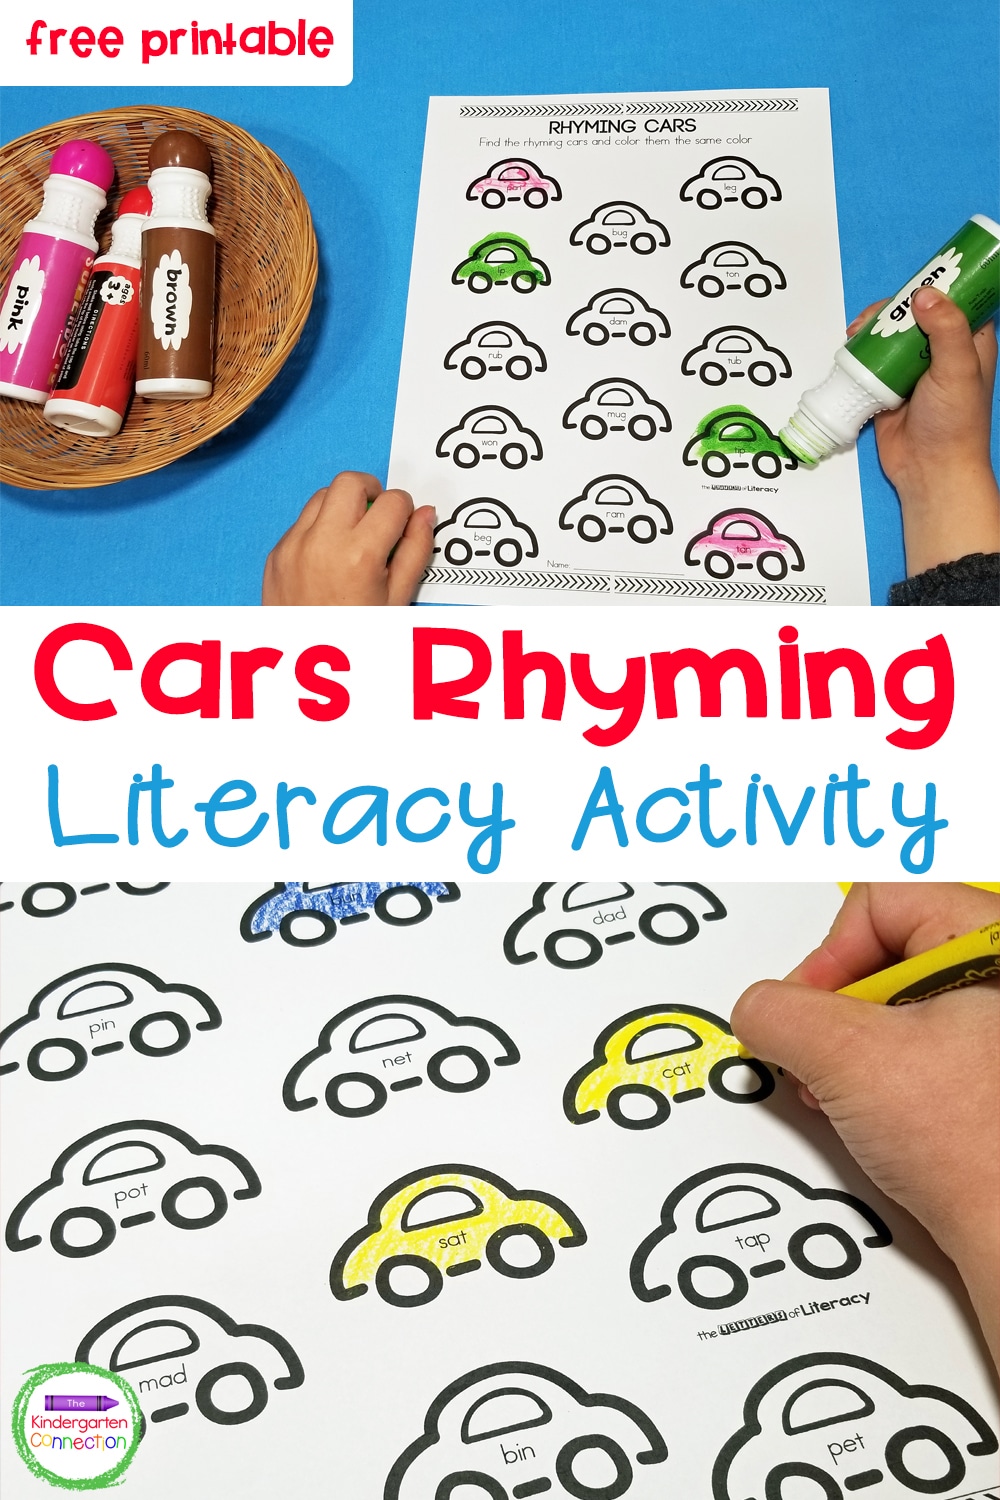 Detecting Rhymes: Teacher Demonstration Page - ppt download